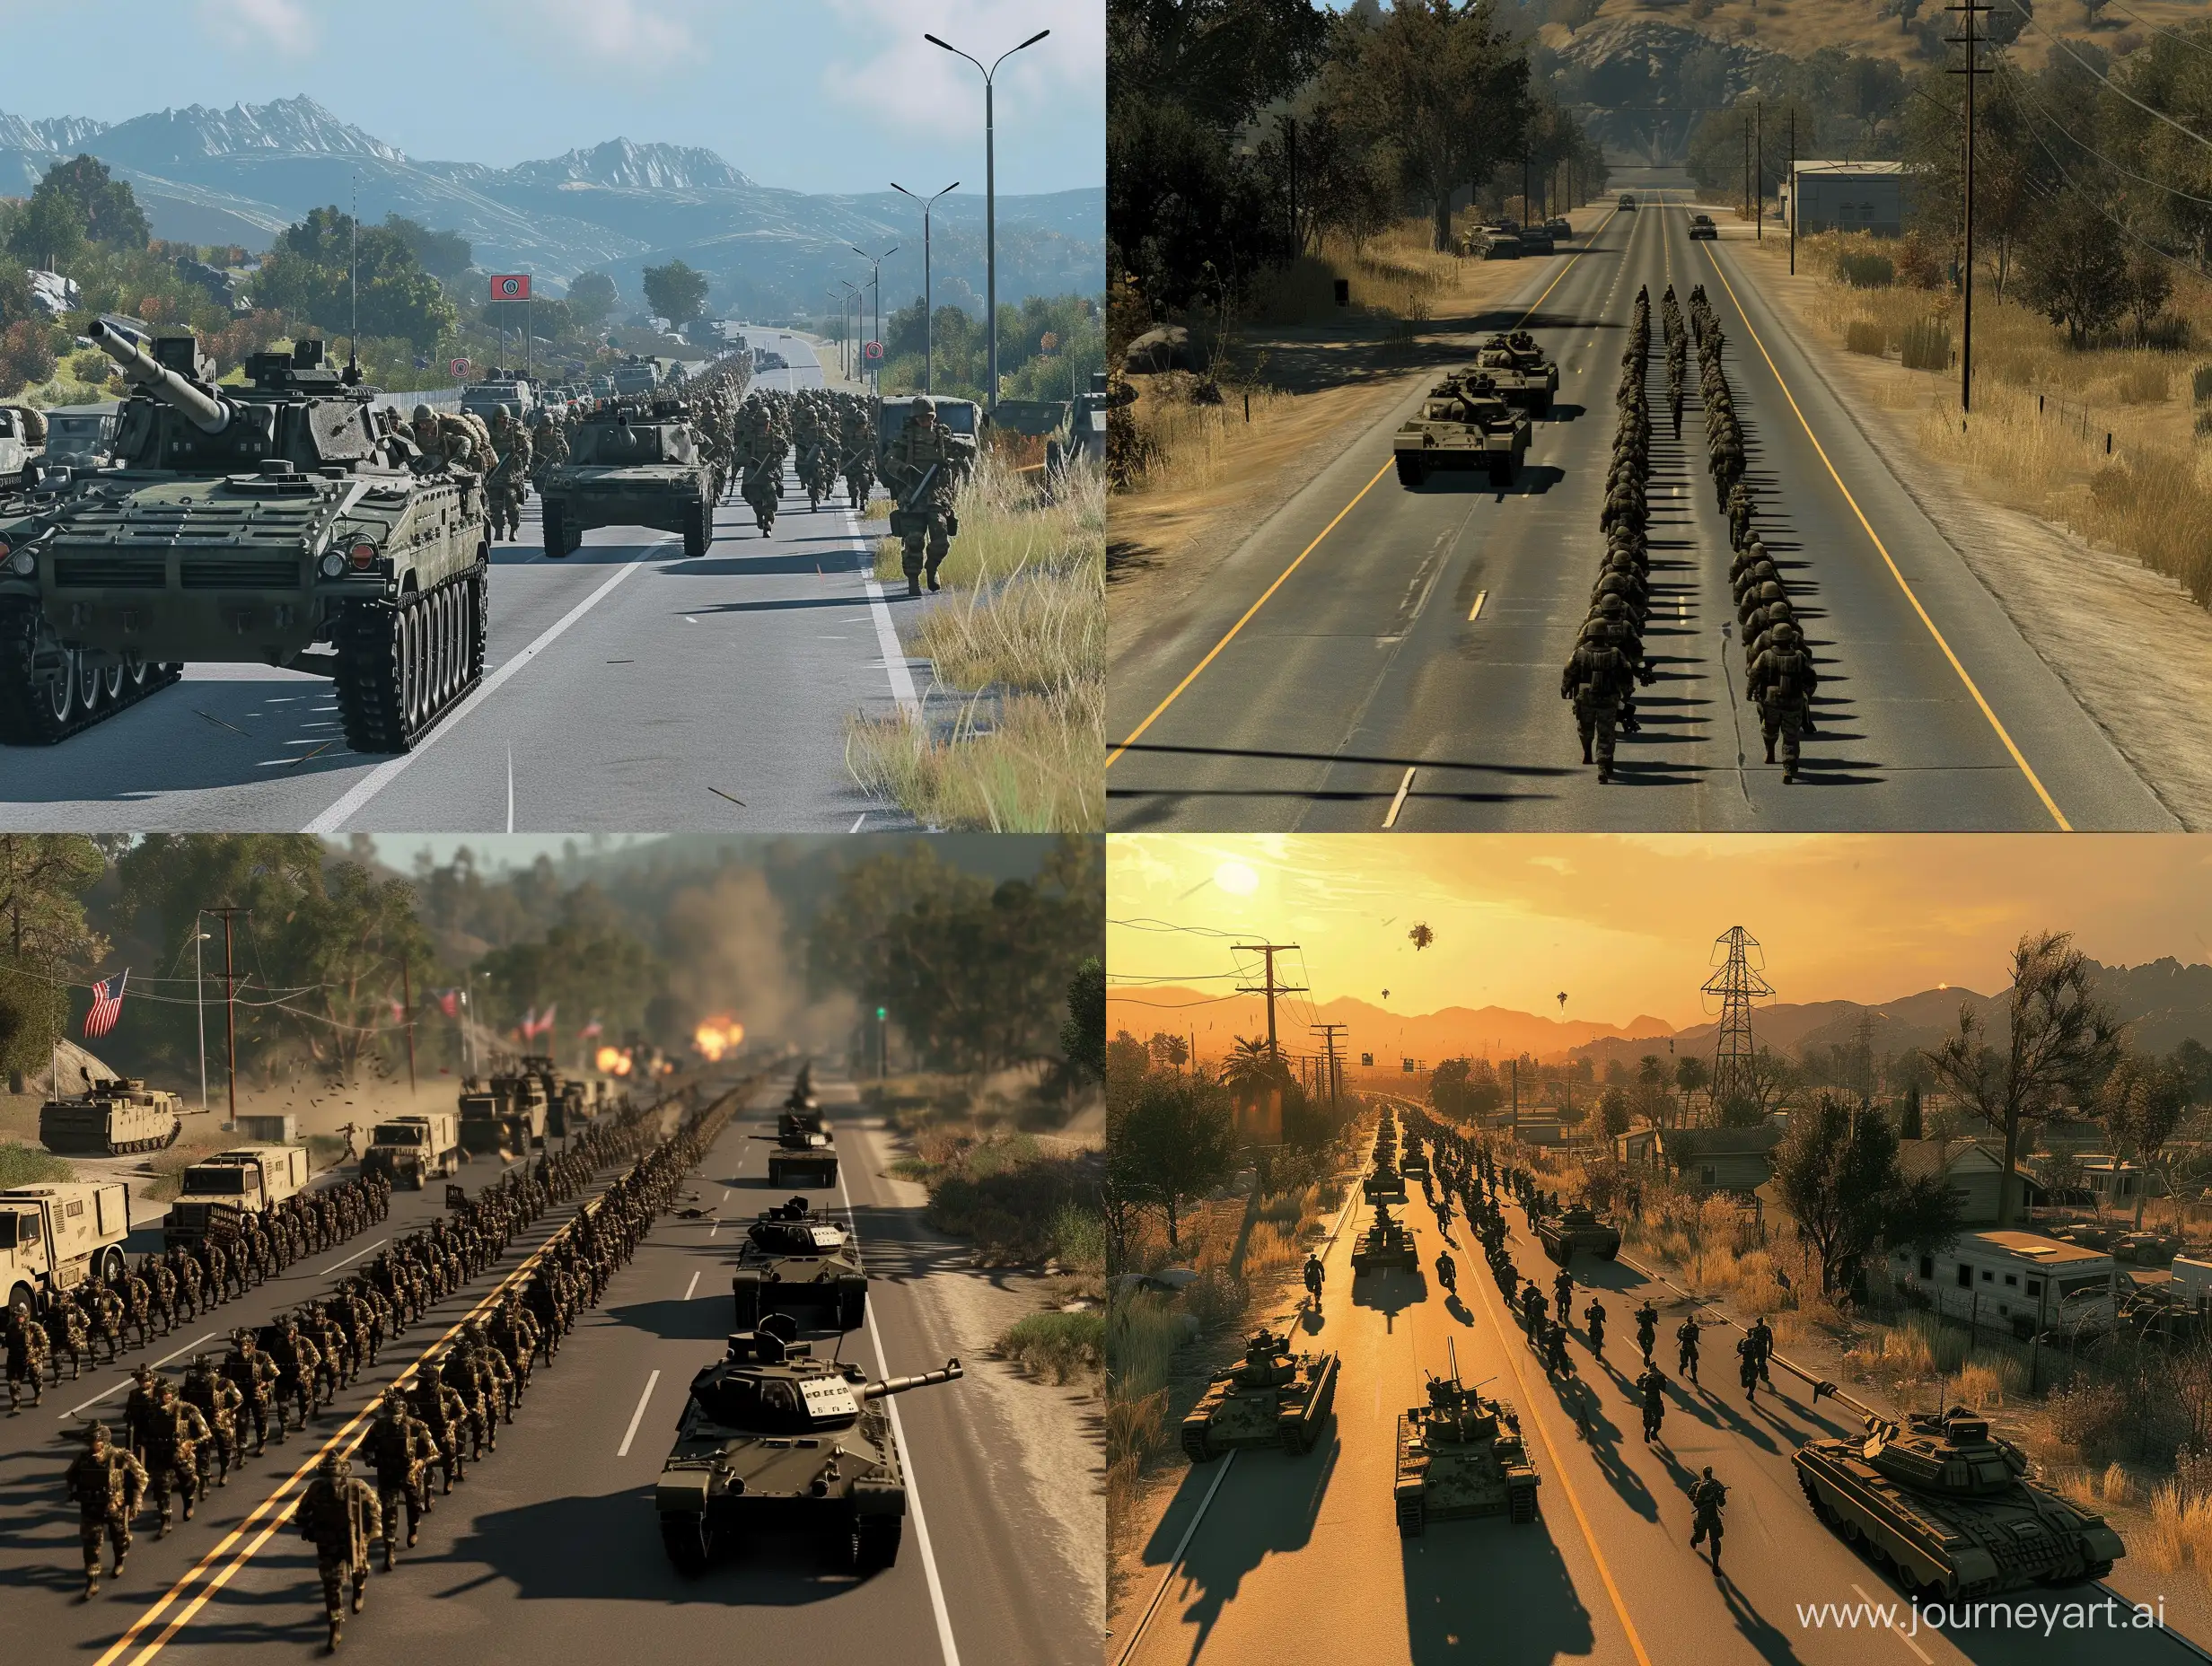 a screenshot capturing The US army is marching down the road with vehicles and tanks, daytime, photorealistic, natural lighting, full view
